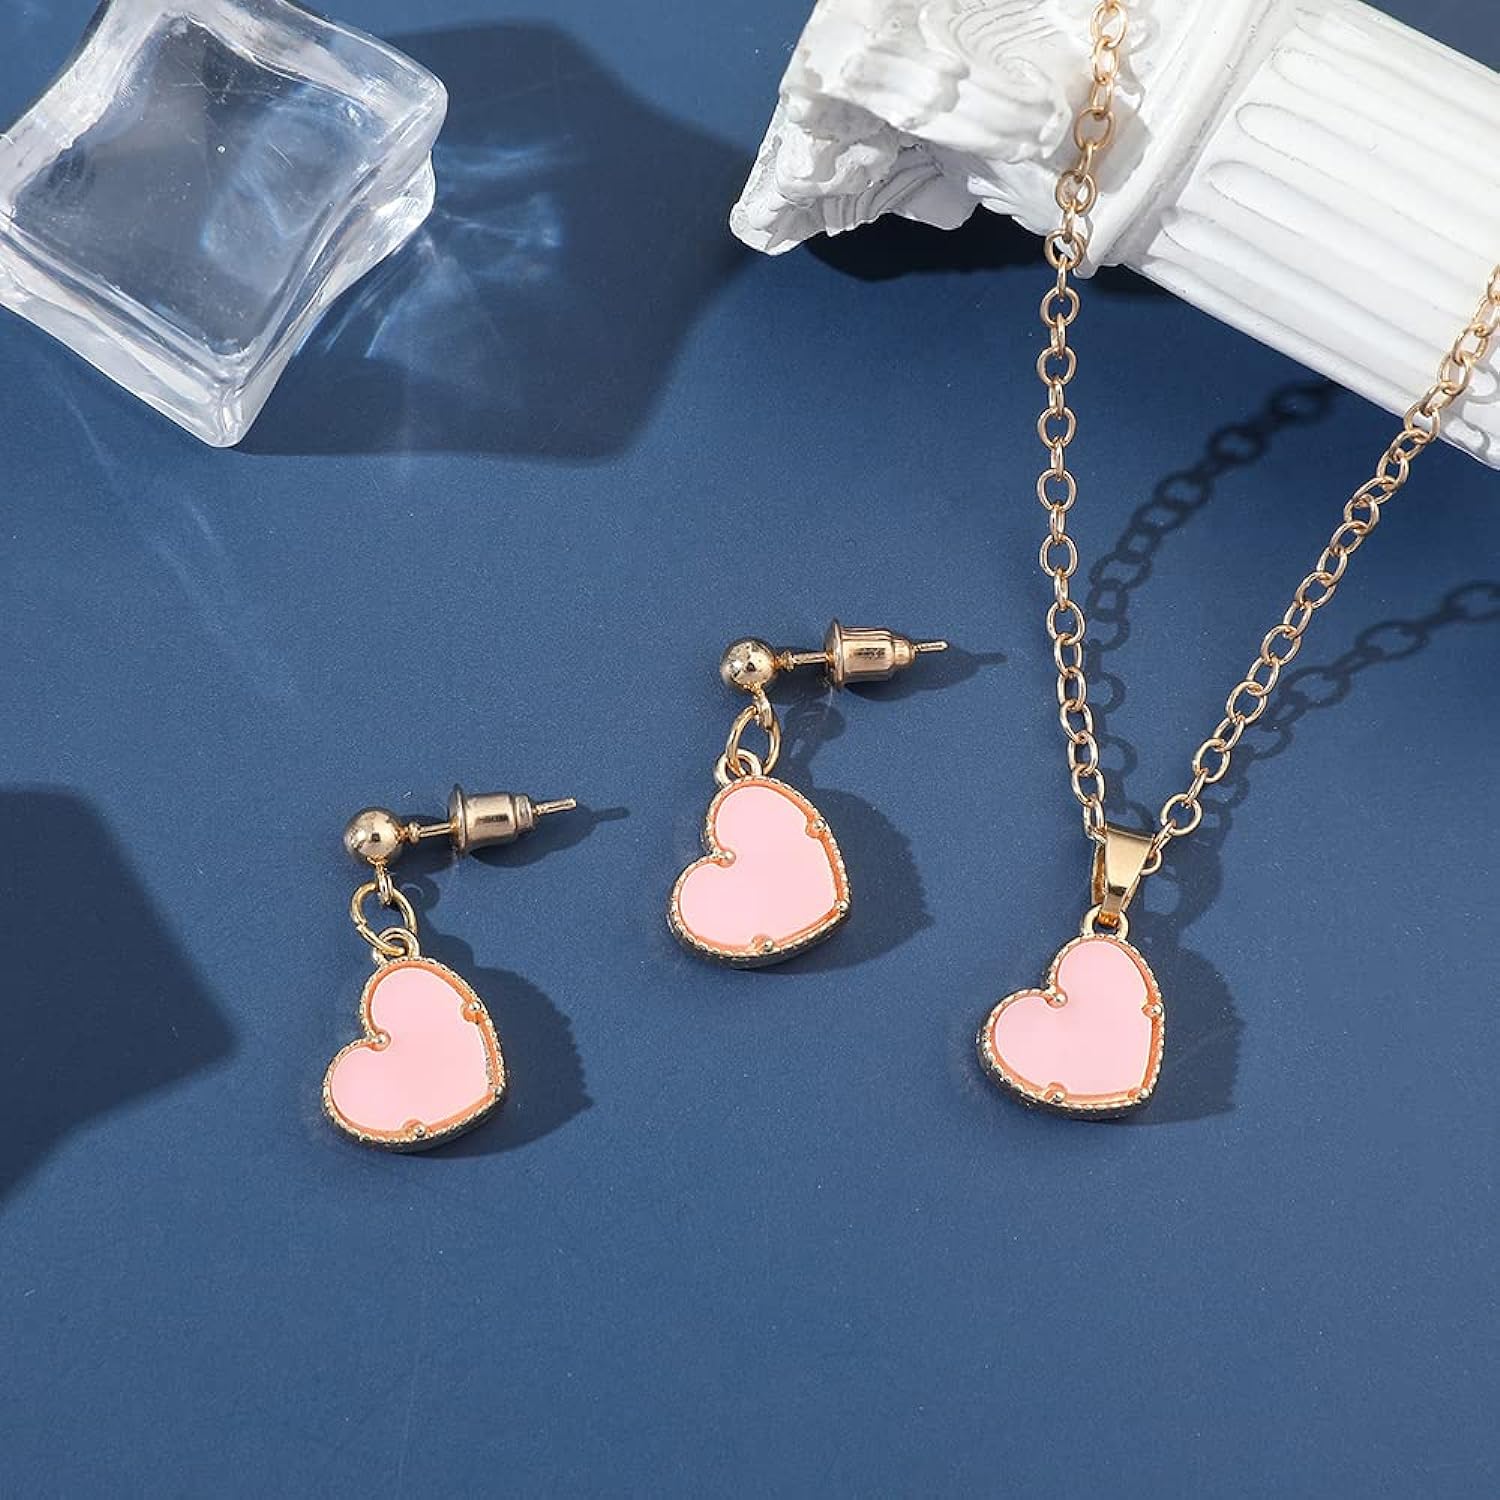 2PCS Heart Butterfly Necklace Earrings Sets for Women-Unique Love Heart Butterfly Alloy Pendant Gifts-Fashionable Jewelry Accessories for Women and Girls